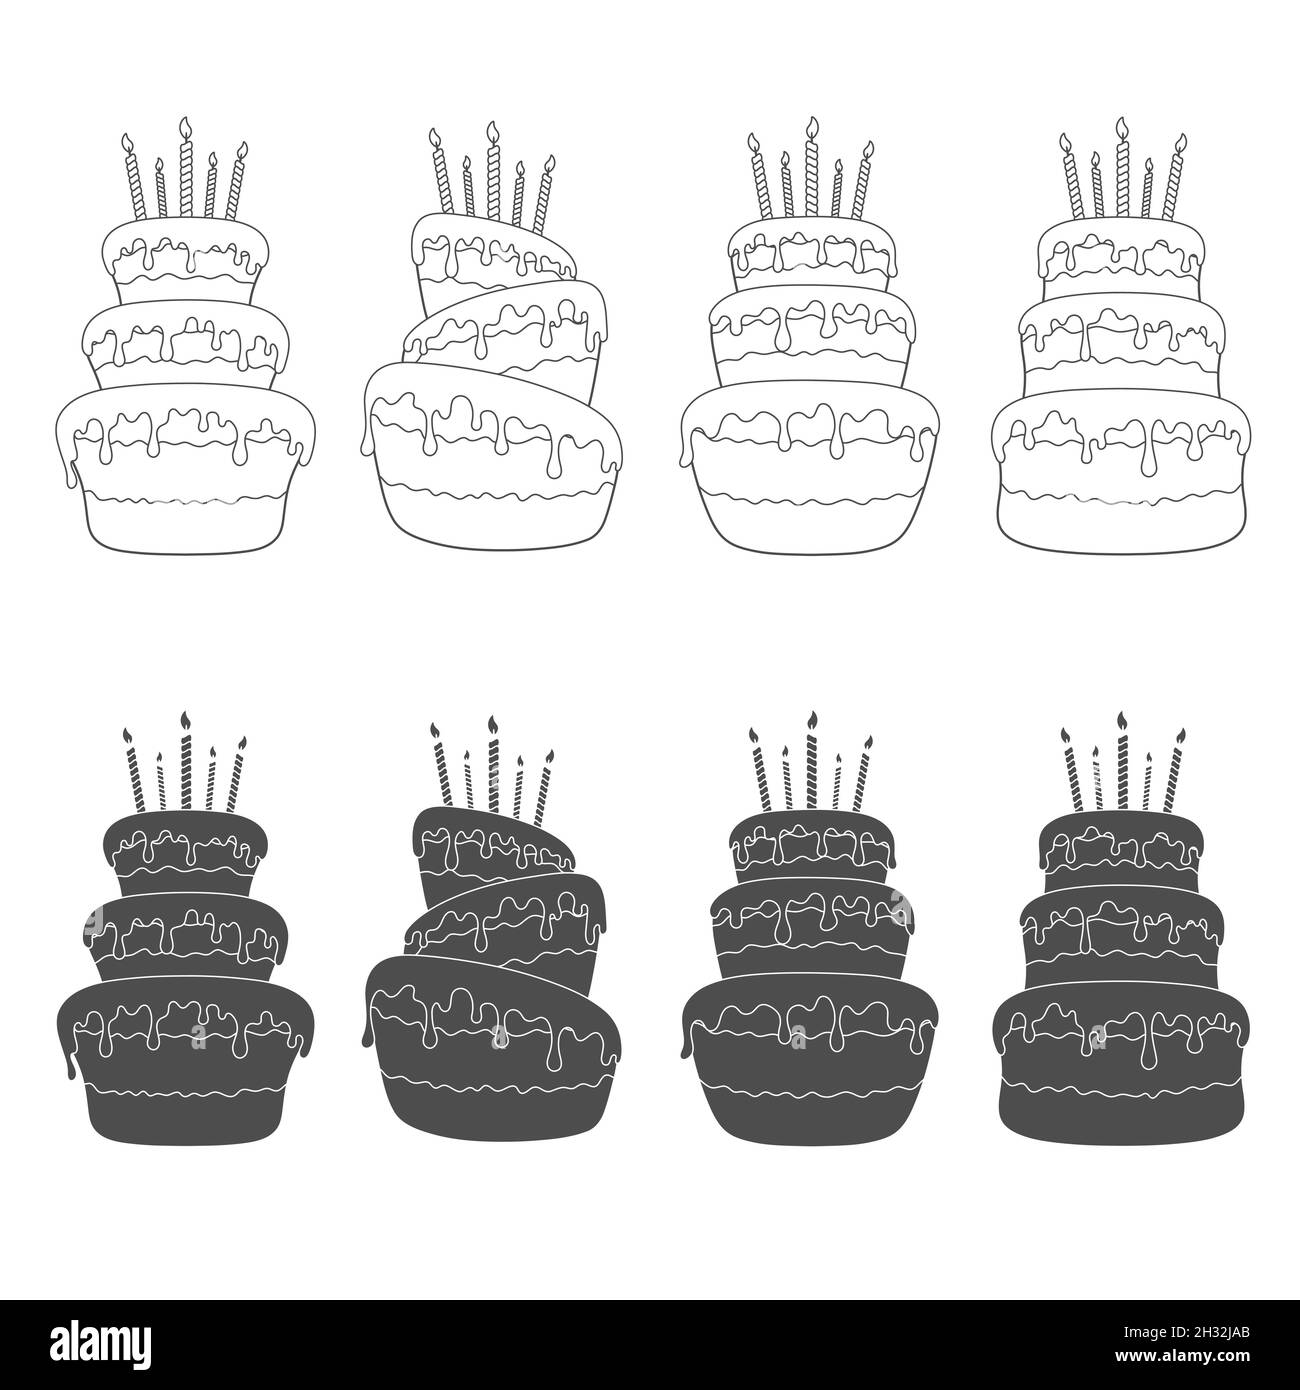 Black and white set of illustrations with a birthday cake. Isolated vector objects on white background. Stock Vector